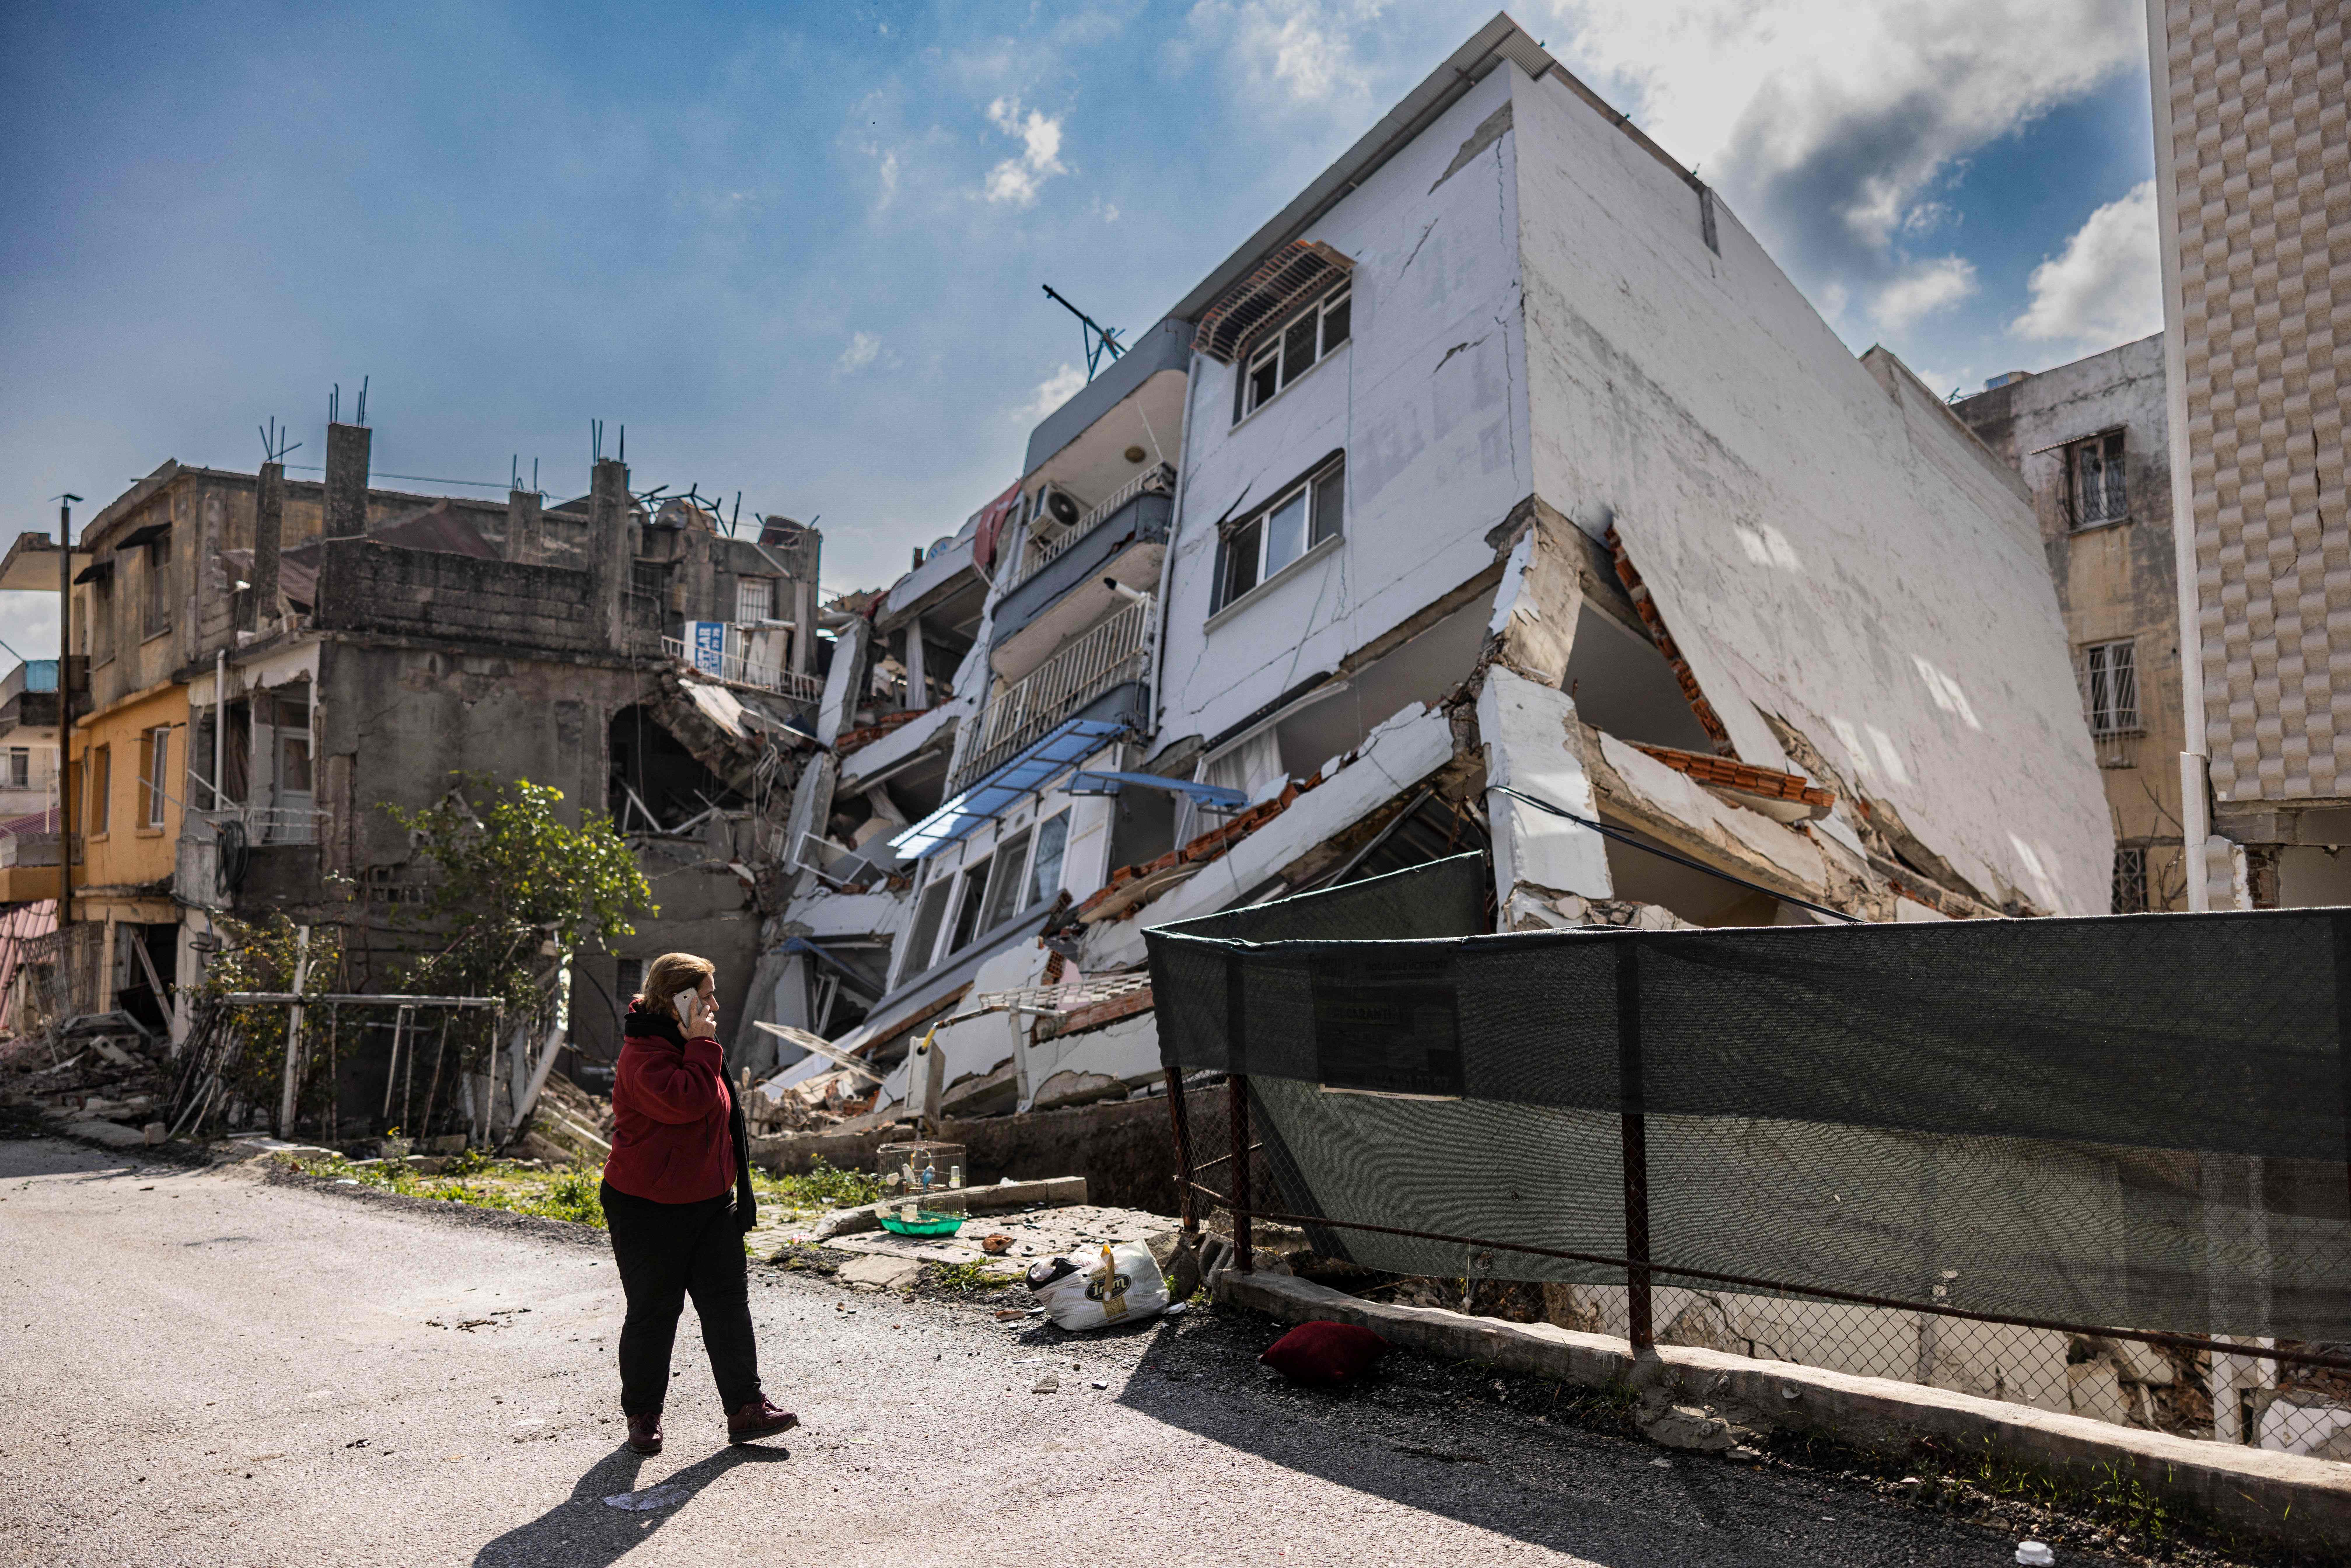 Android's earthquake warning system failed in Turkey, says BBC